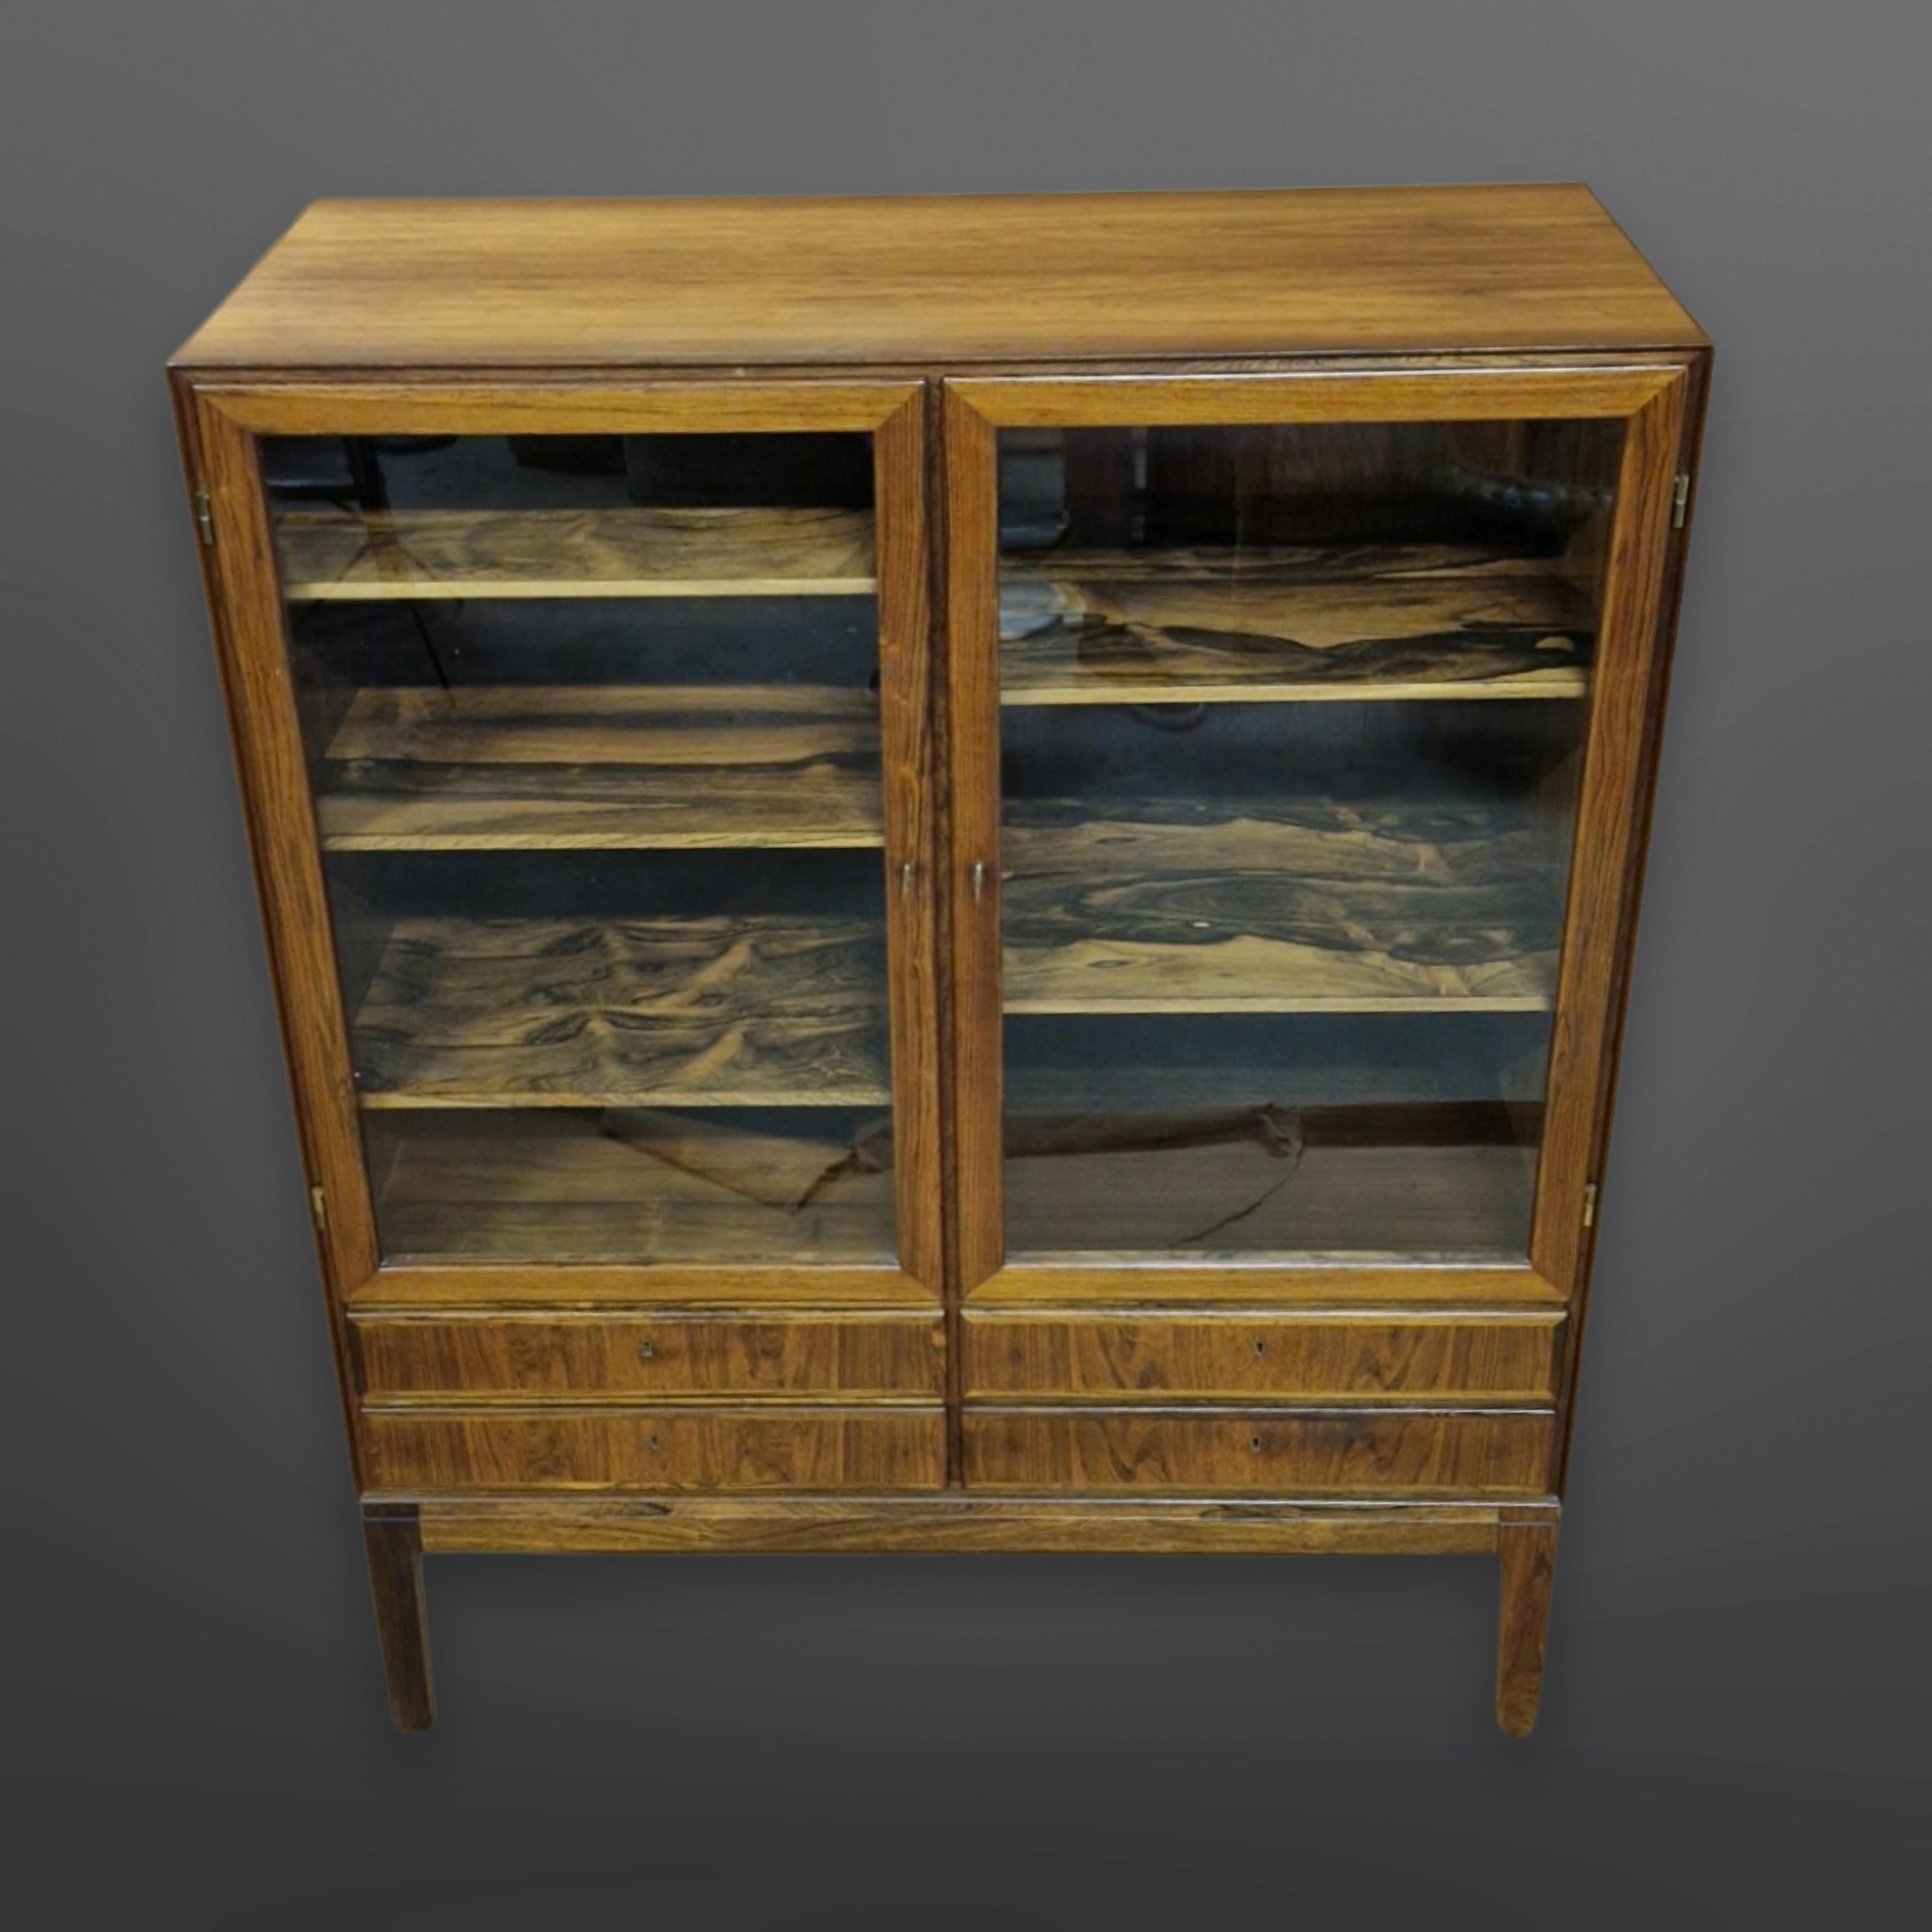 Exclusive high board cabinet in hardwood with 2 doors and 4 drawers. This exceptional piece is part of the Rungstedlund series. Hinges and keys in brass, veneered inside out with beautiful trays. It can be used as room divider due to veneered back.